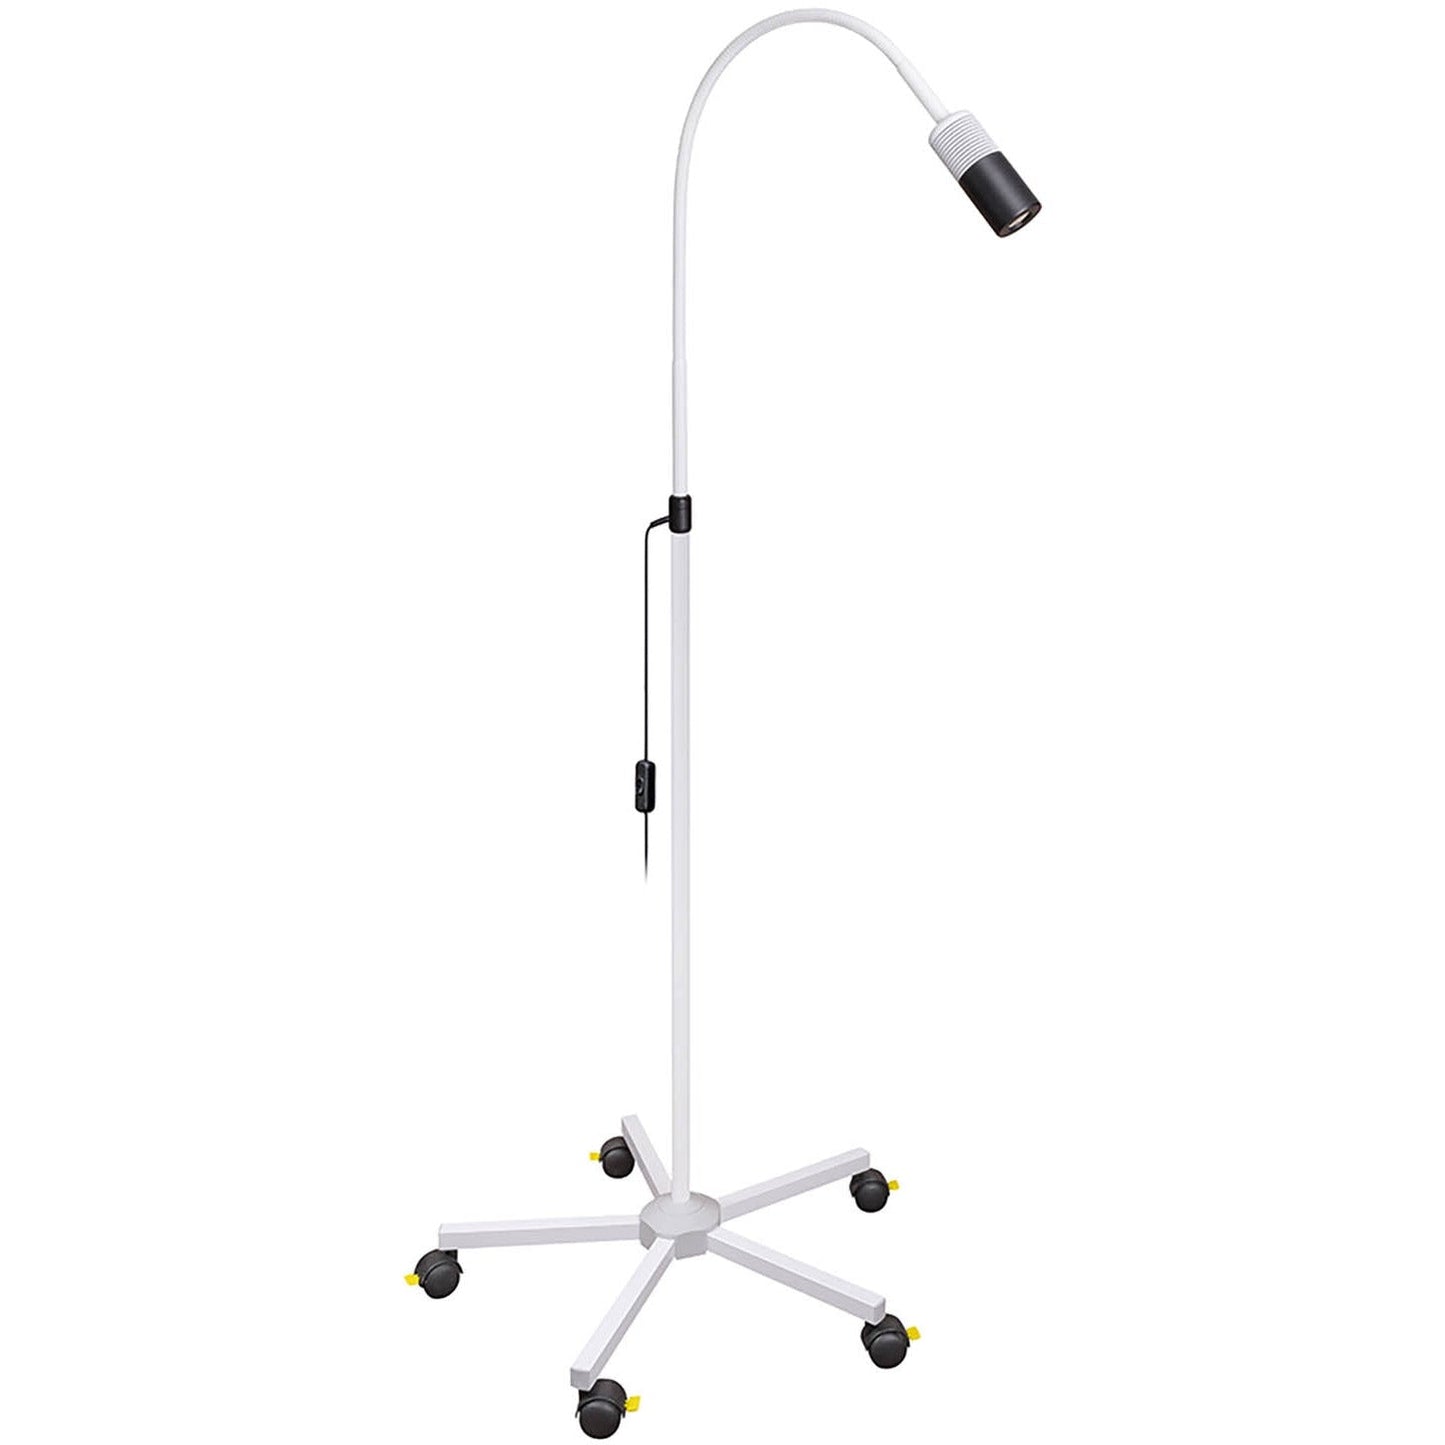 LED Examination Lamp FOCUS on 5-feet-stand - Powder Coated - White - CLEARANCE